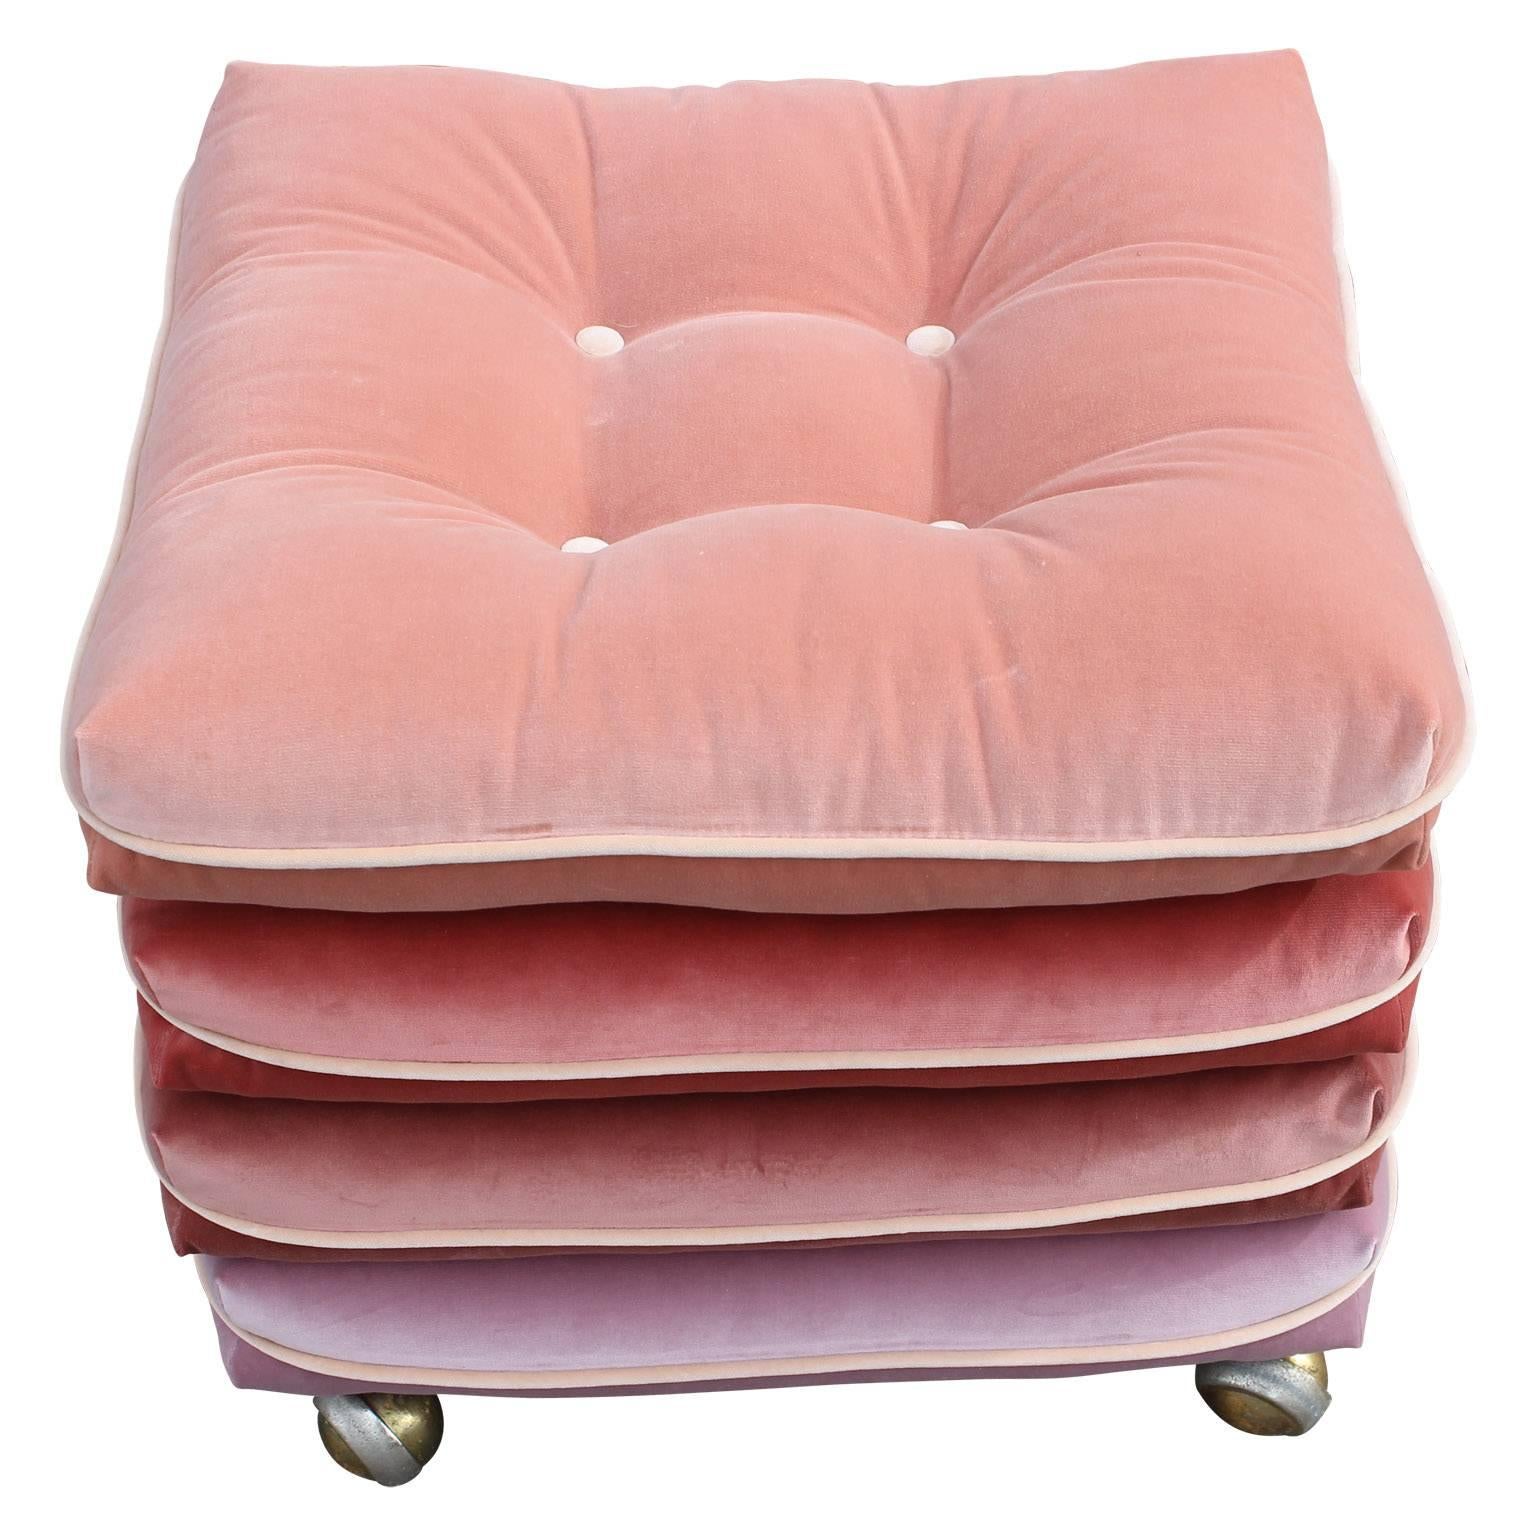 Unique and stunning pair of custom made pink velvet gradient cushion stools on rolling brass feet. The cushions are permanently attached to the base. These would be perfect for any modern, mid-mod or hollywood regency space. 